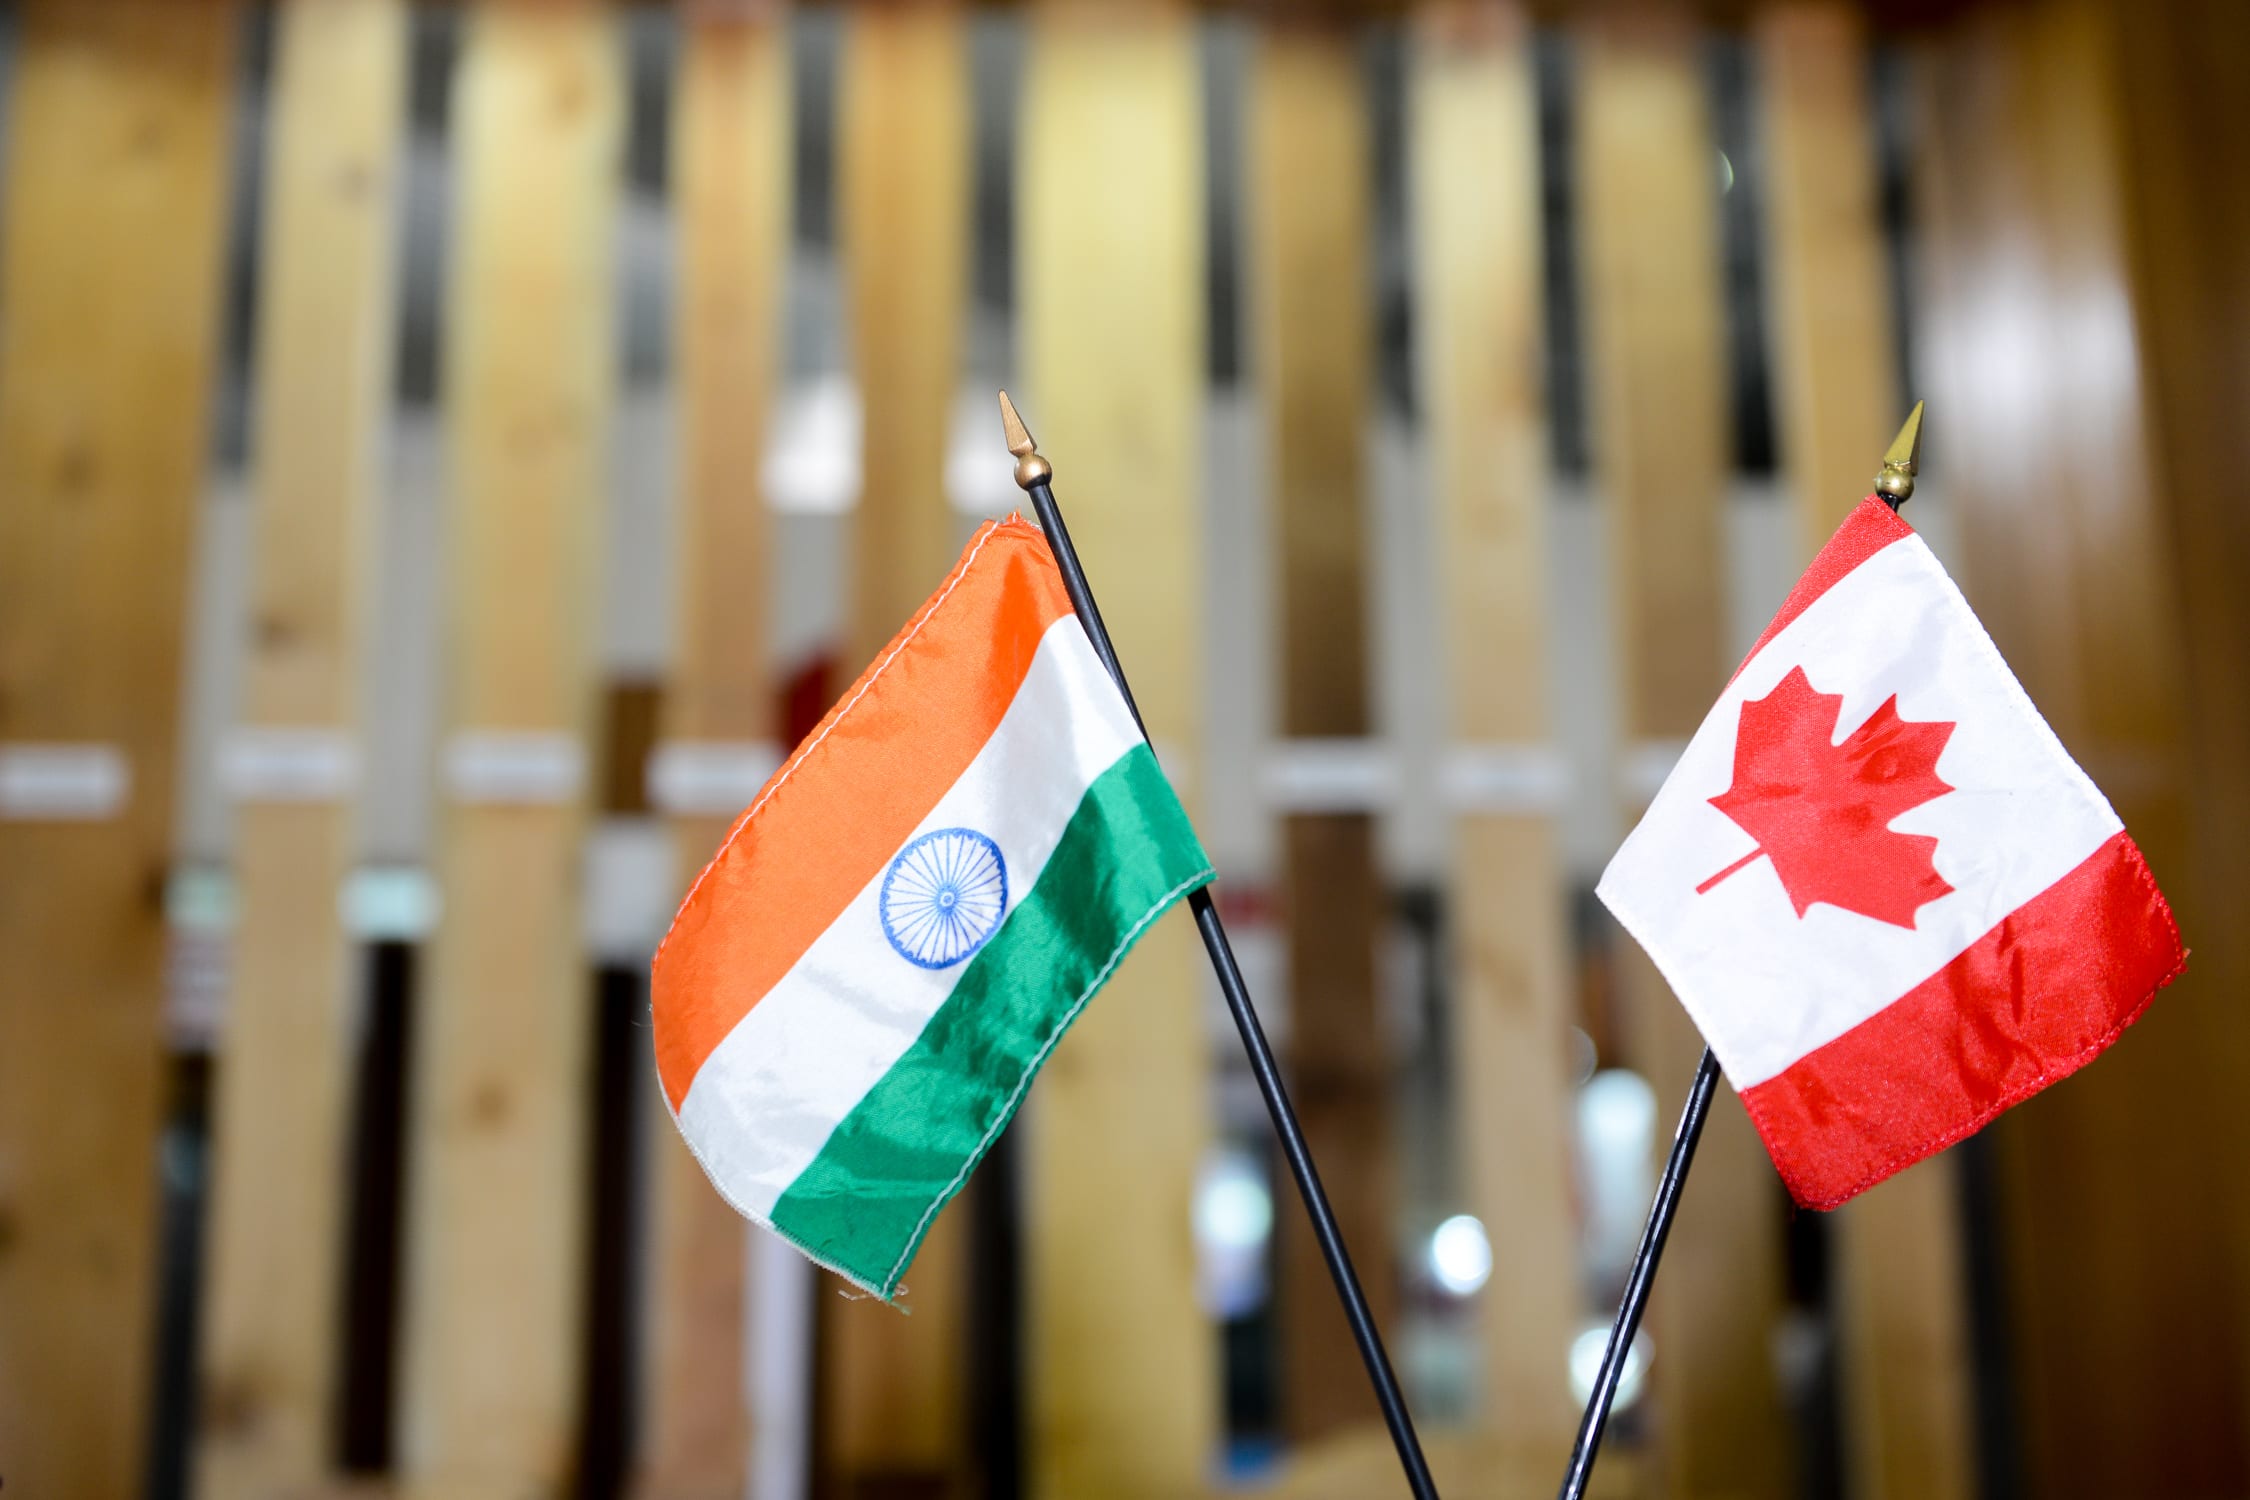 Representatives from B.C. and Canada embark on mission to India to understand market opportunities